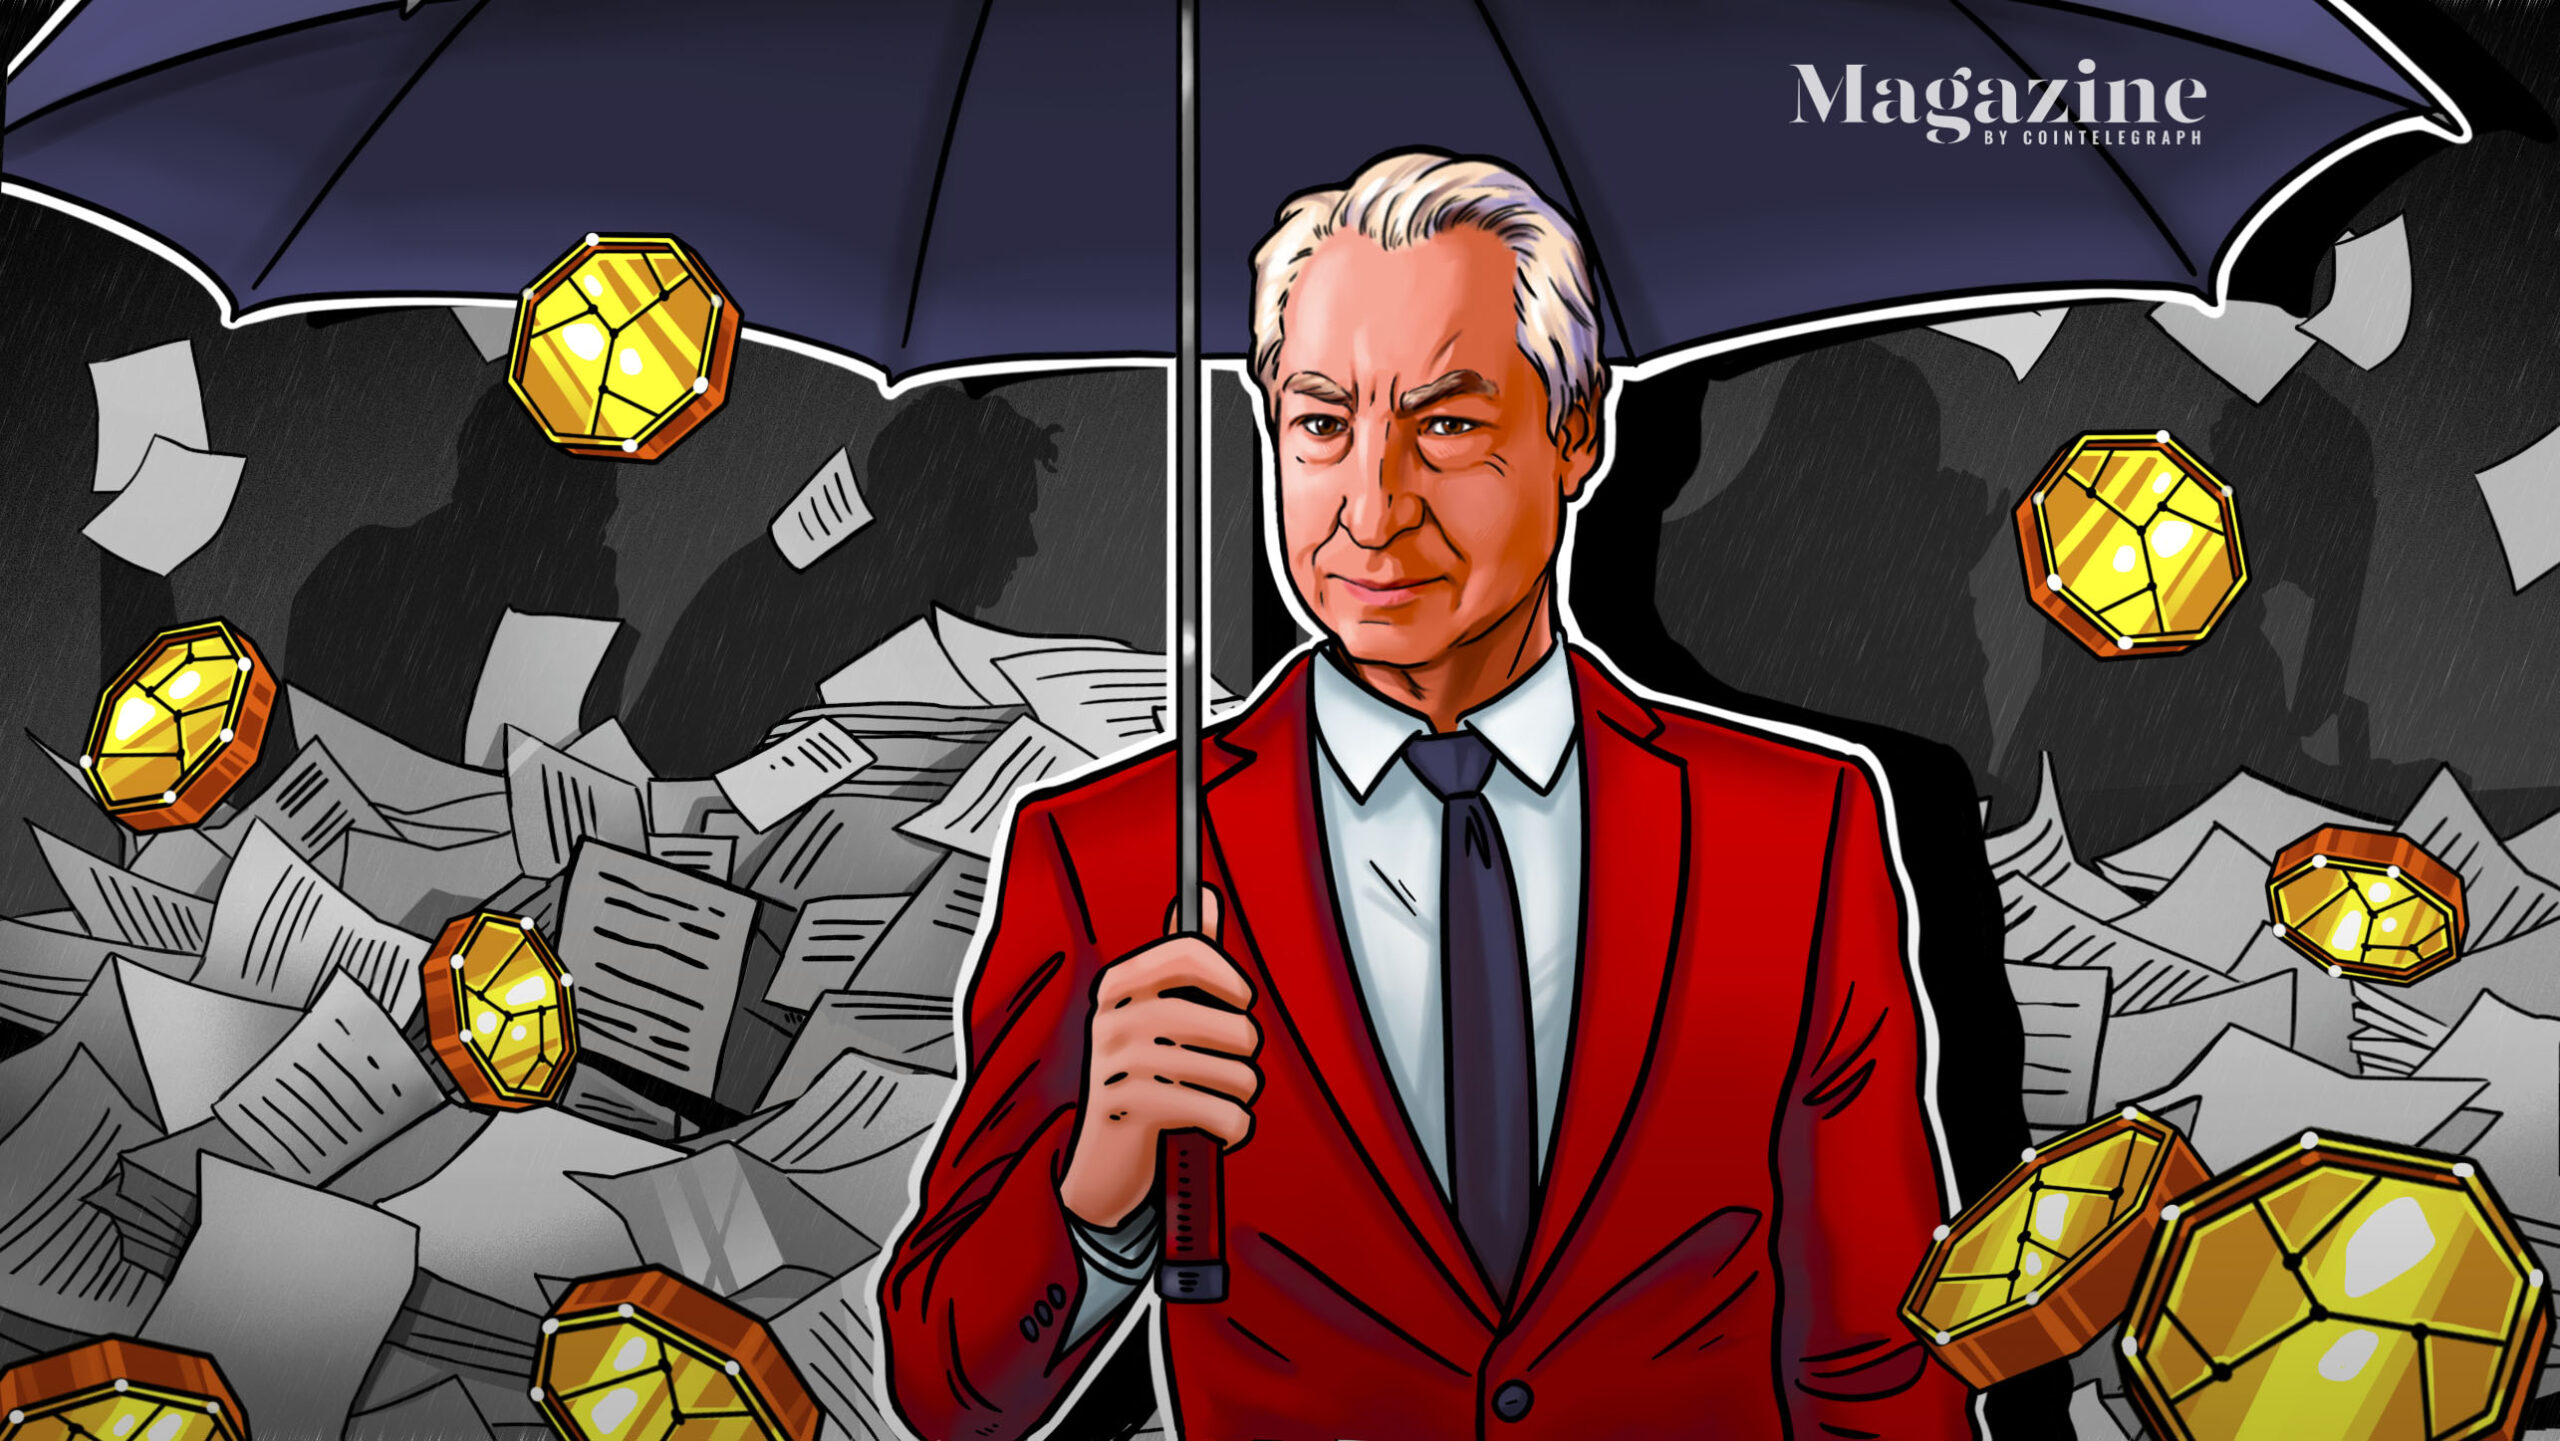 Powers On… Summer musings after two particularly bad months in cryptoland – Cointelegraph Magazine